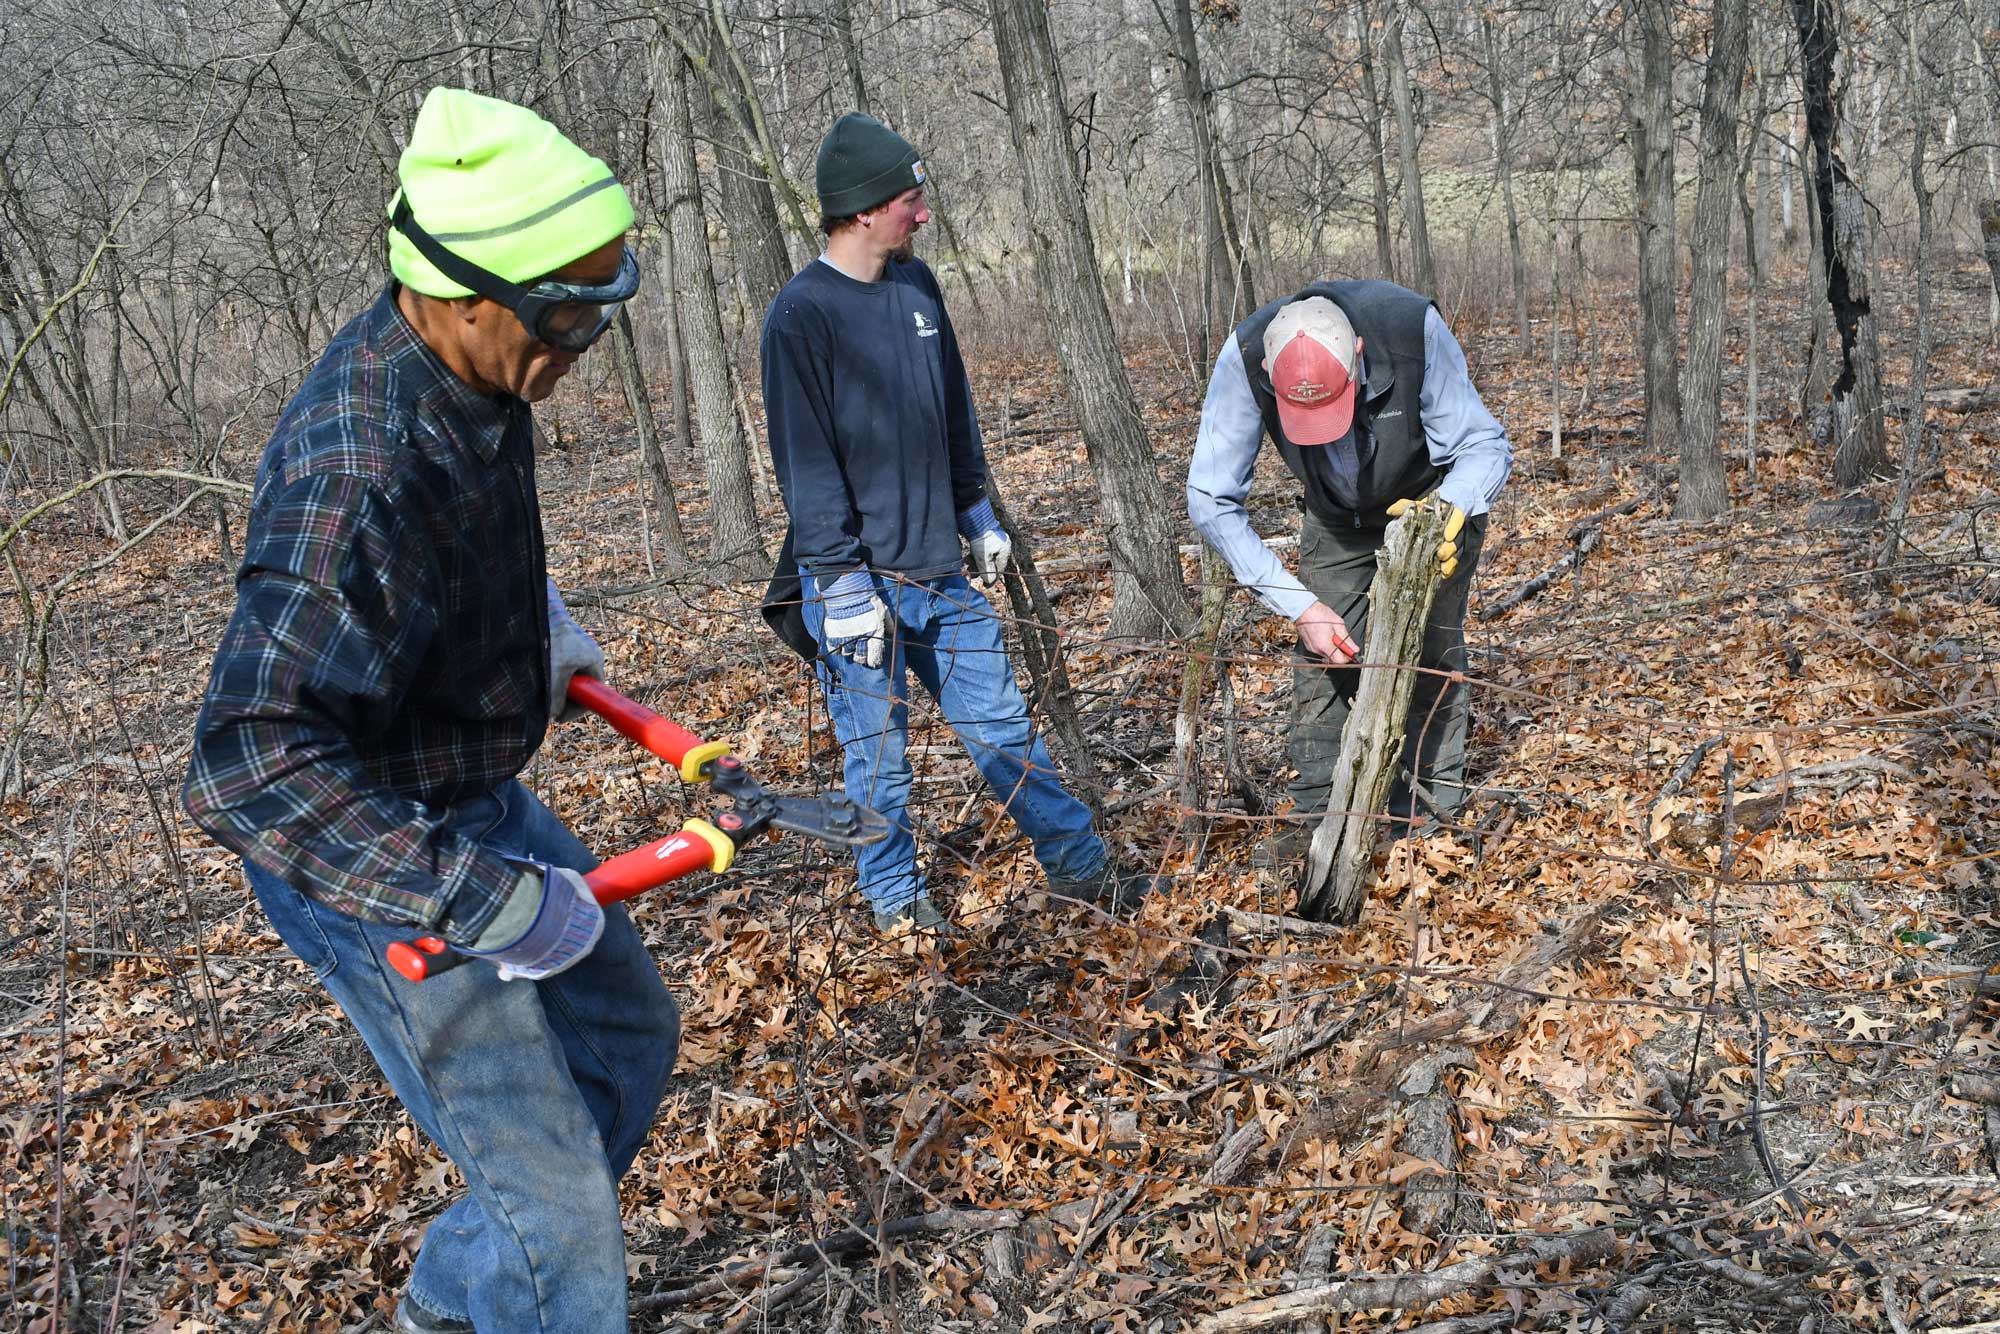 Three volunteers clean up brush in a forest.